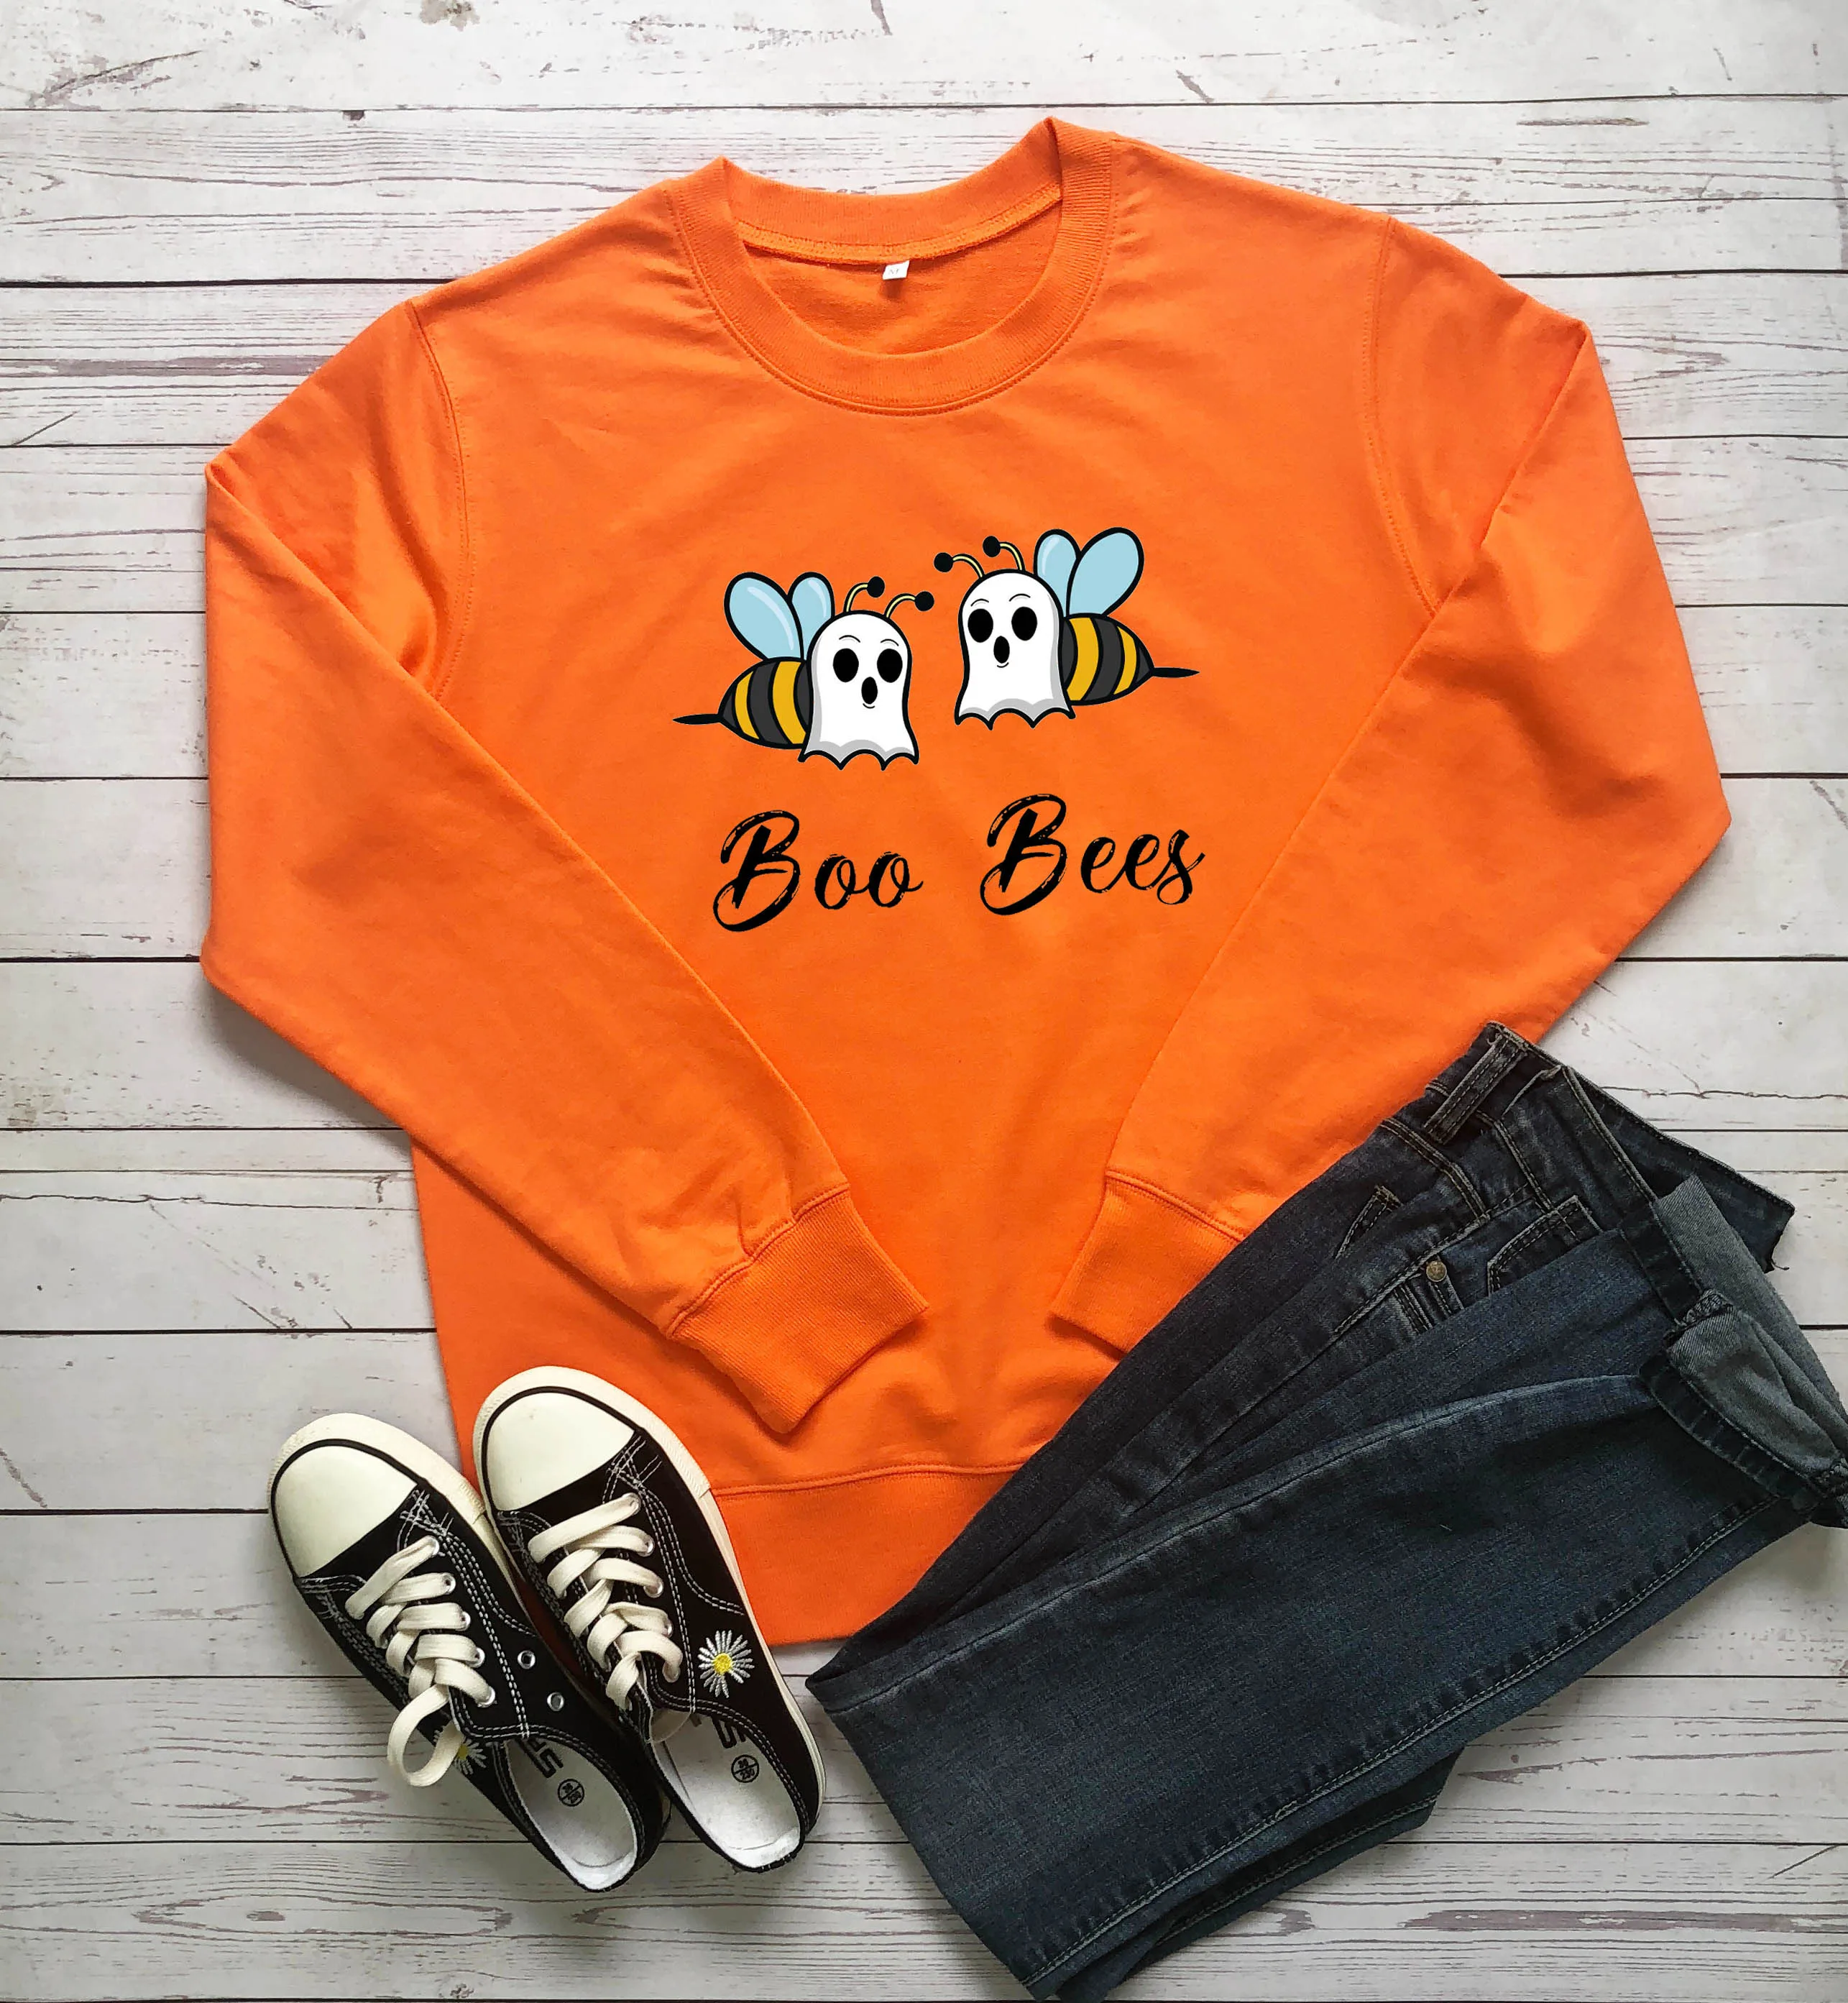 

Wing boo bees pure cotton sweatshirt young graphic cute party pullovers funny slogan kawaii grunge tumblr hipster vintage tops